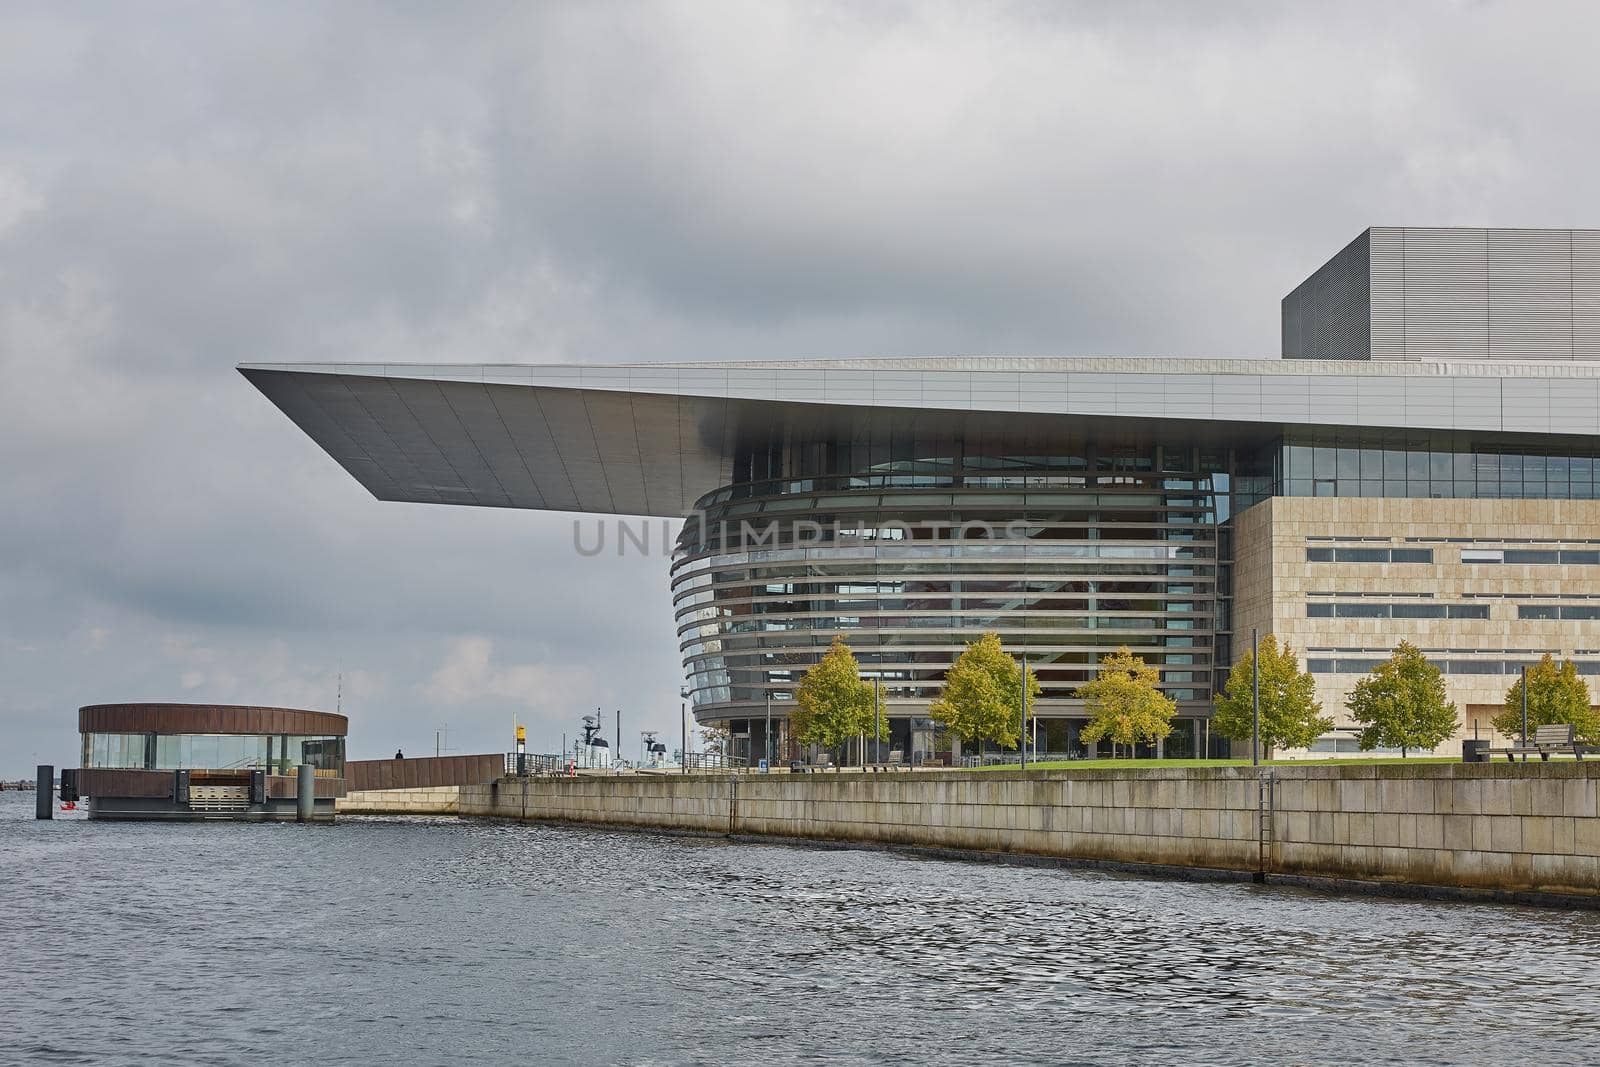 COPENHAGEN, DENMARK - MAY 25, 2017: The National Opera House "Operaen" located on the island of Holmen in central Copenhagen. One of the most expensive opera houses ever built.